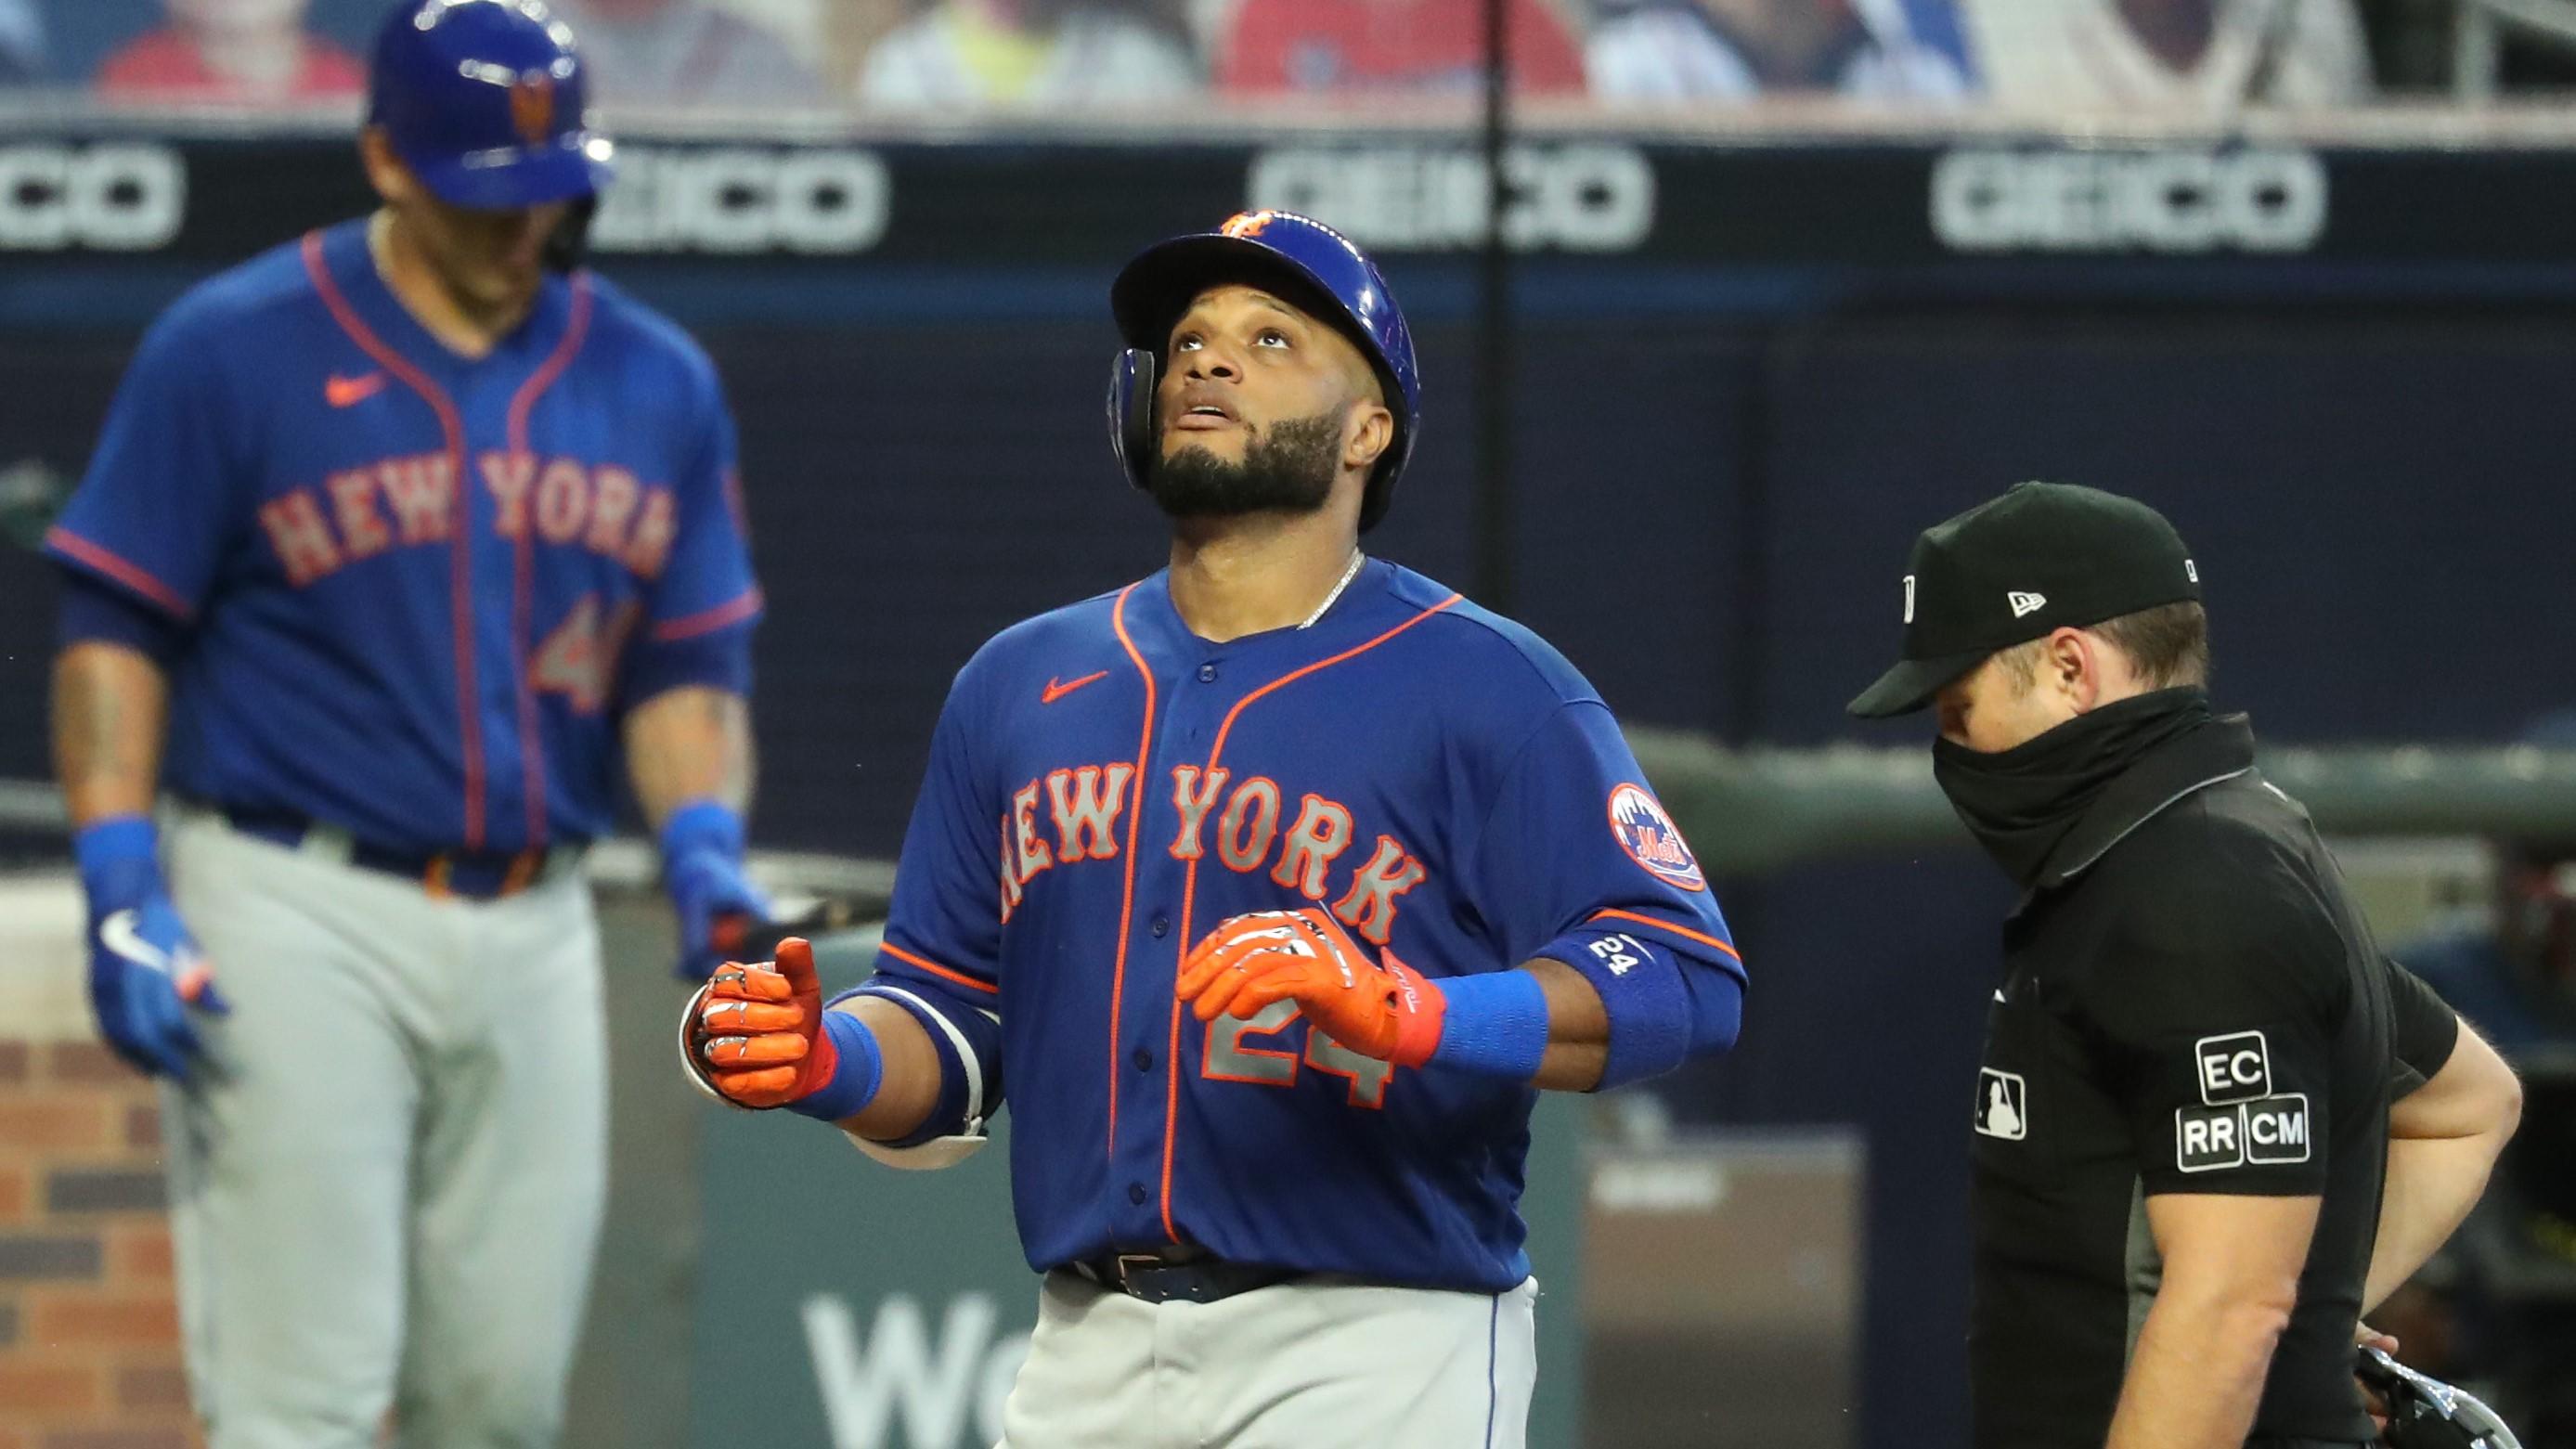 New York Mets second baseman Robinson Cano (24) reacts after his solo home run in the fifth inning against the Atlanta Braves at Truist Park. / Jason Getz